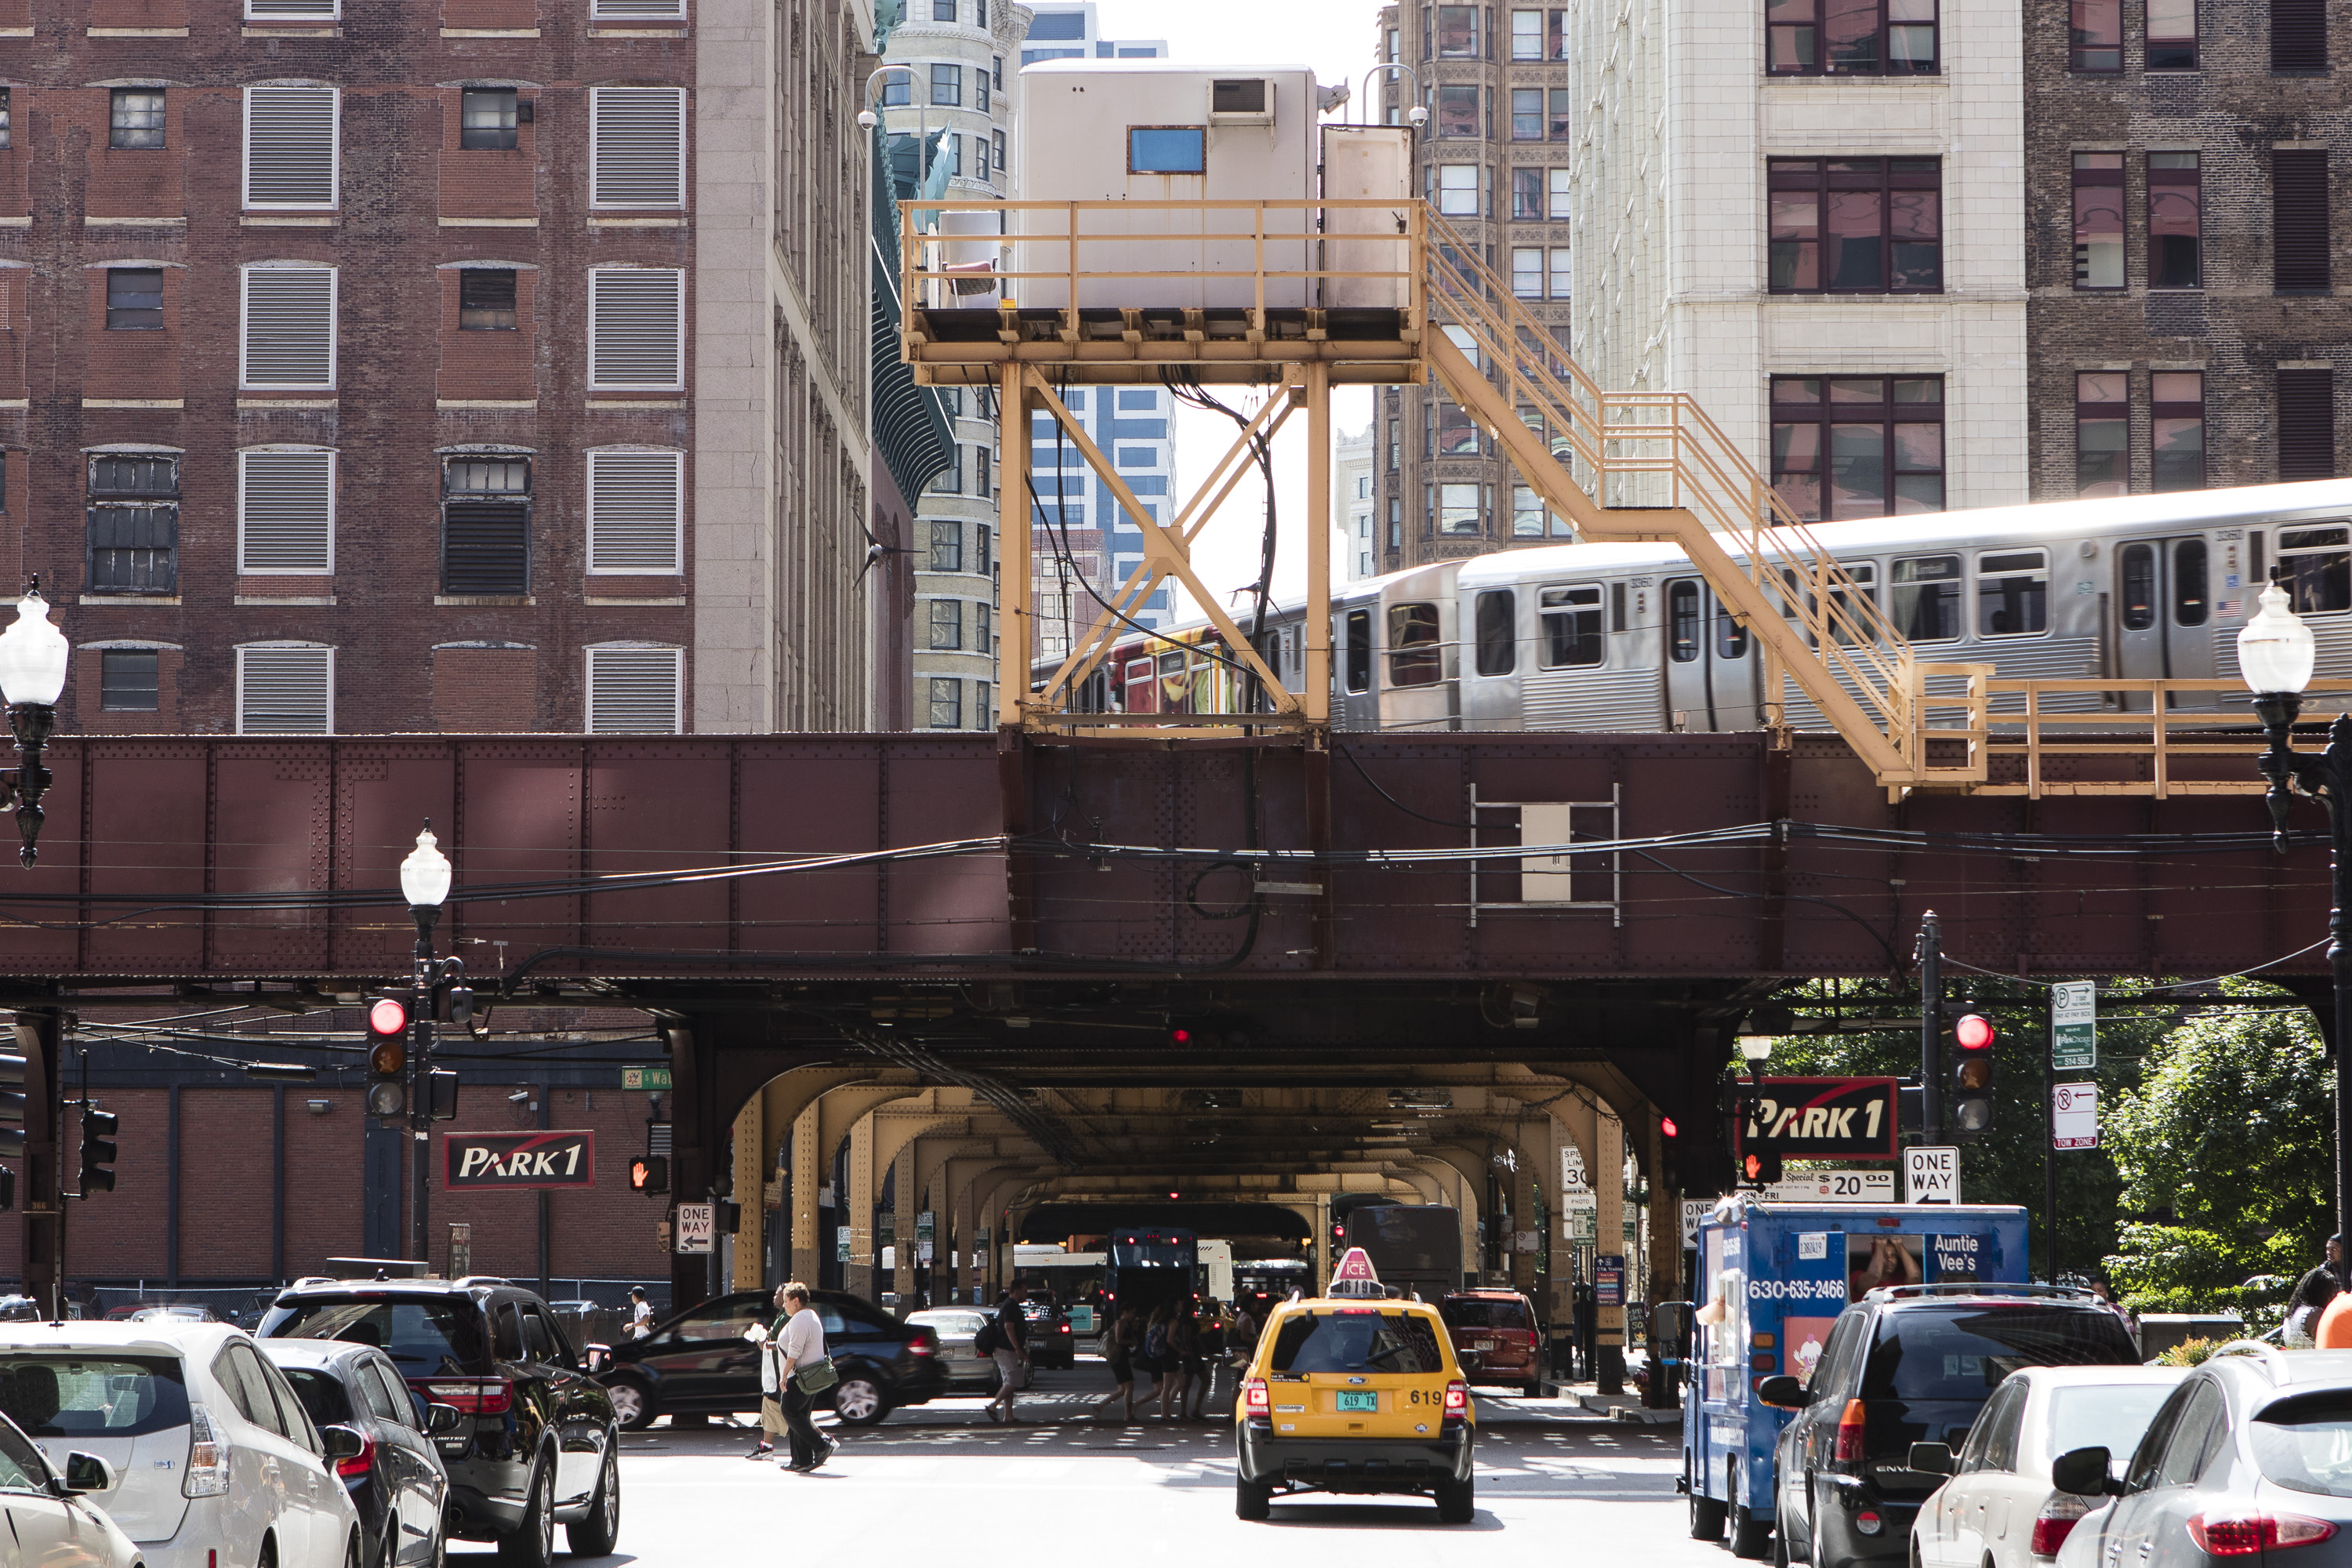 The Chicago Transit Authroity's pink line train passes over the 300 block of South Wabash Ave. Wednesday, July 15, 2015. (DePaul University/Jeff Carrion)